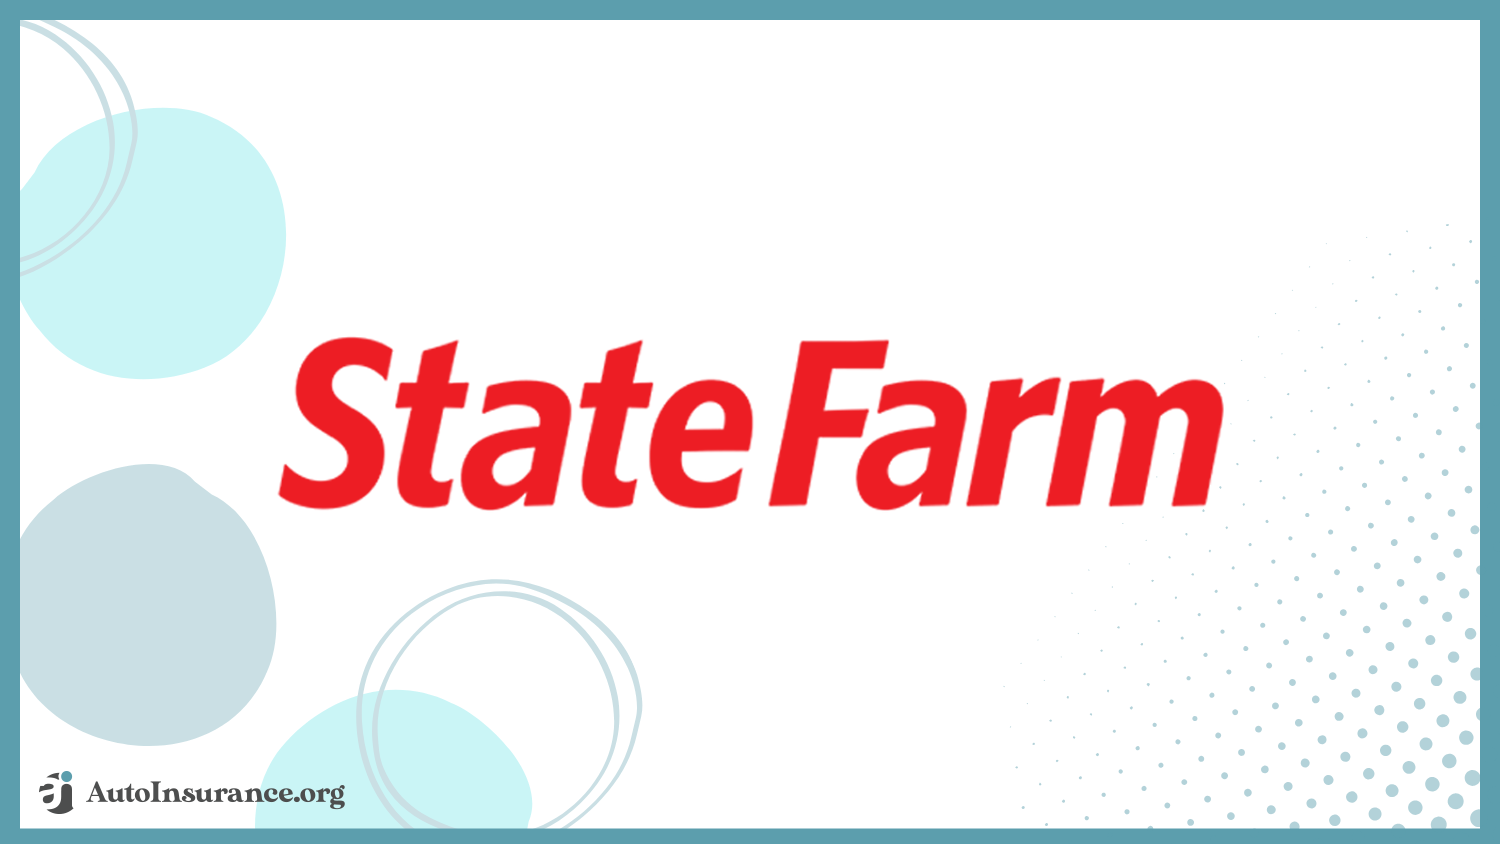 State Farm: Cheap Auto Insurance for Teens After an Accident